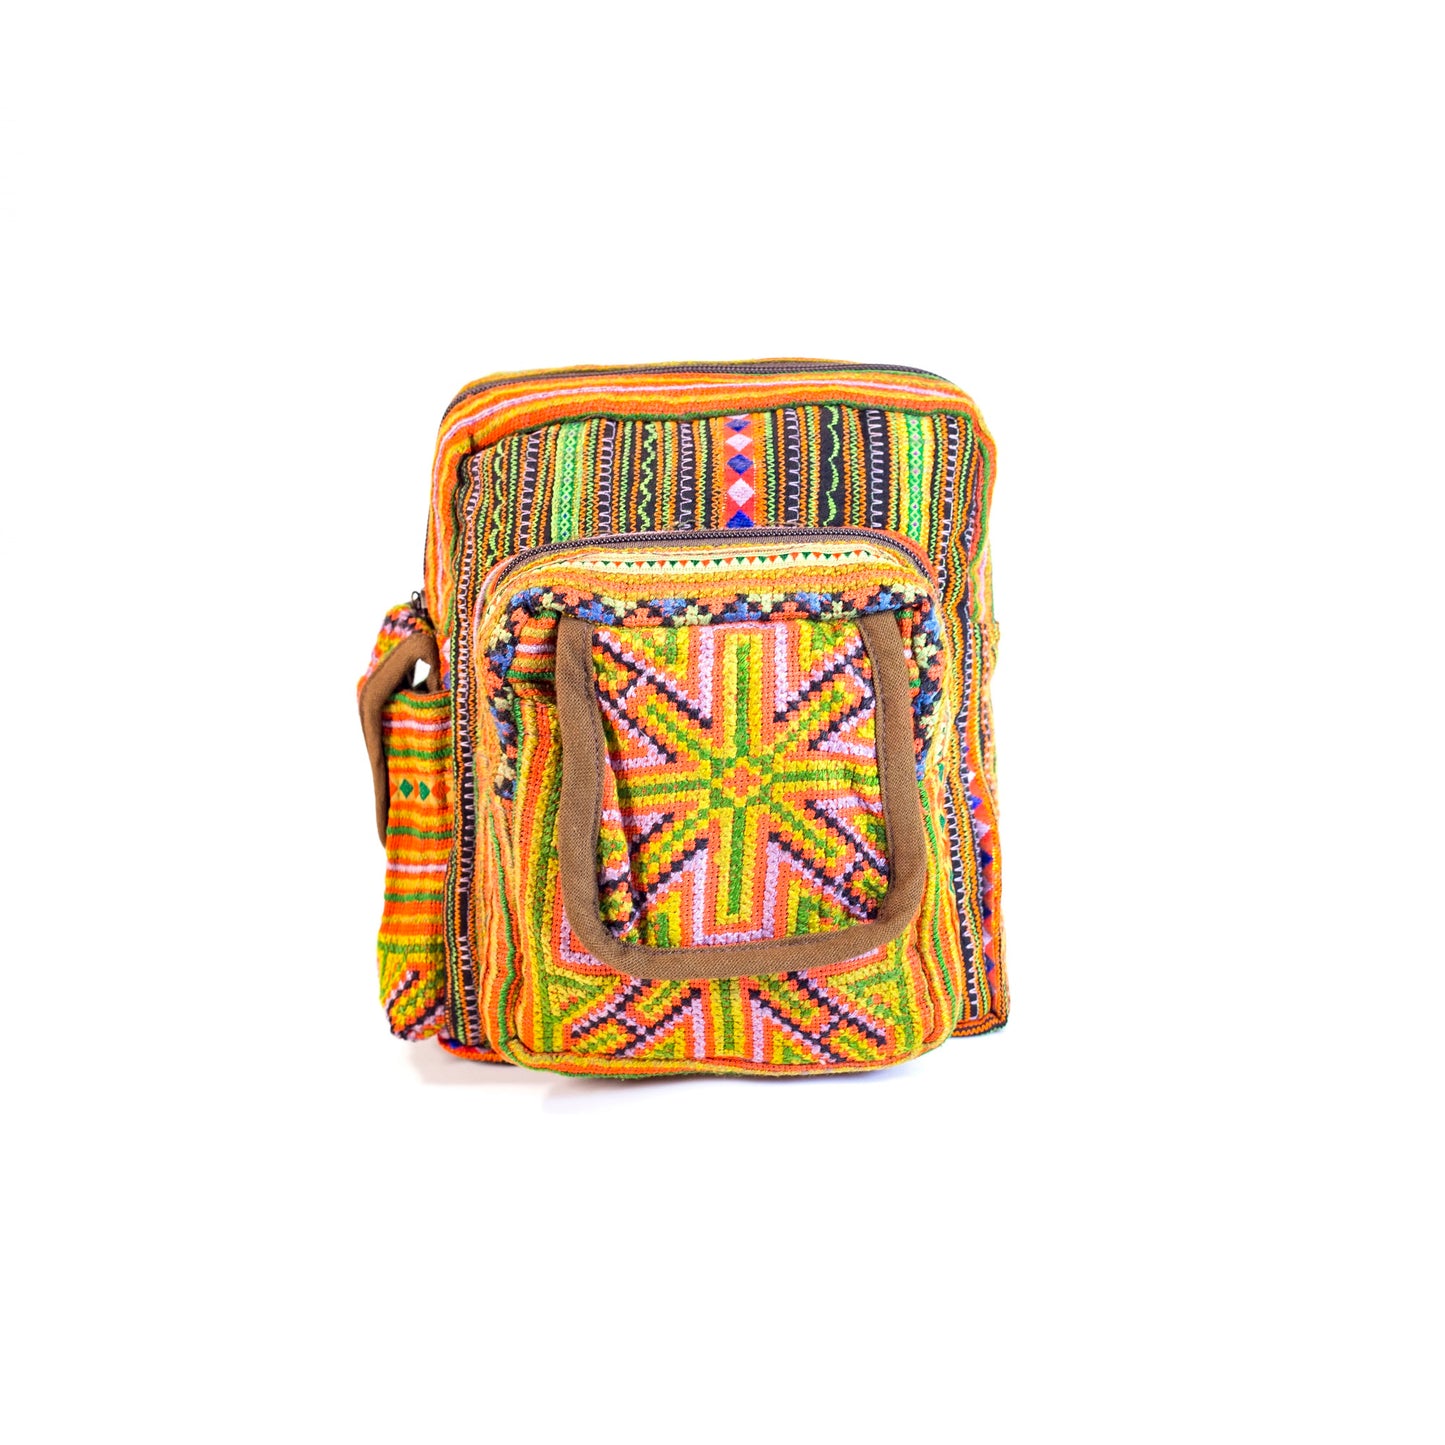 Boho-style linen, embroidery Sling bag, H'mong tribal pattern in ORANGE silk thread and brown rim